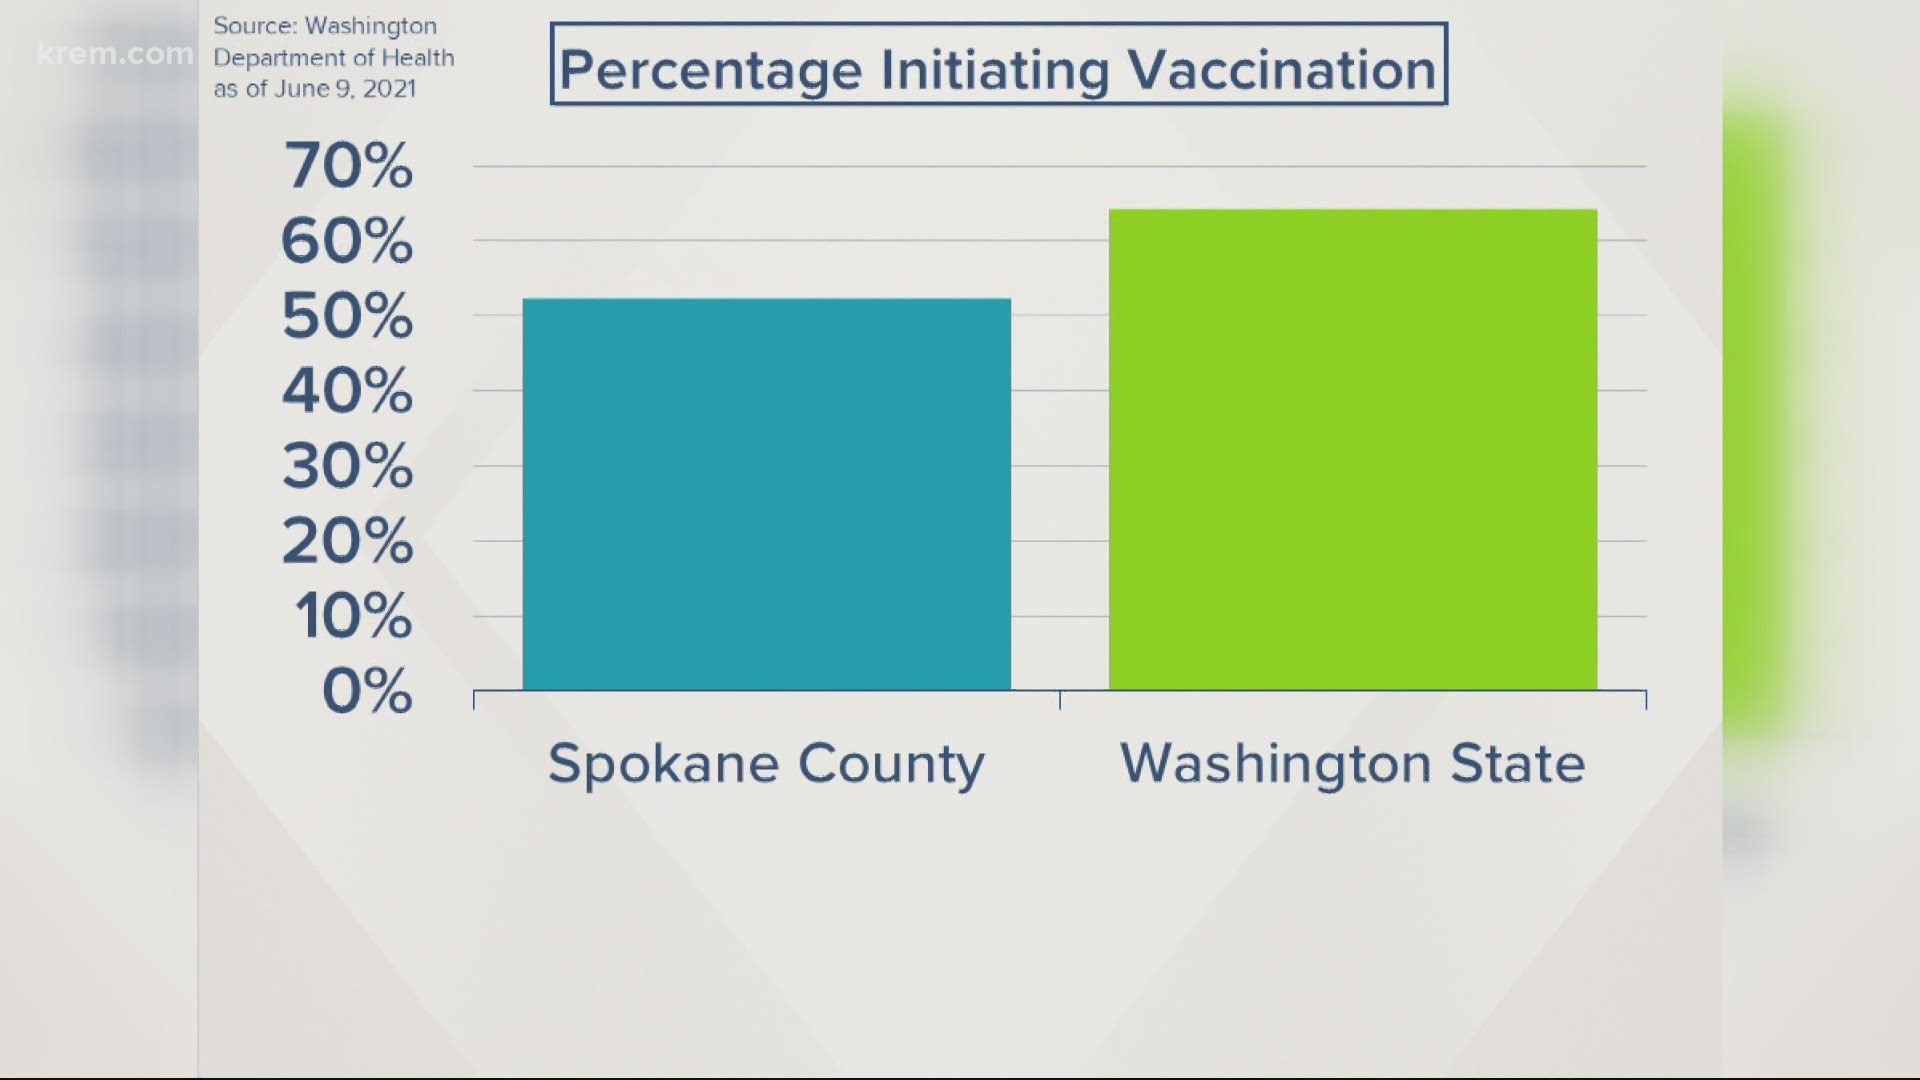 Washington state is currently at a 64.25% vaccination rate.